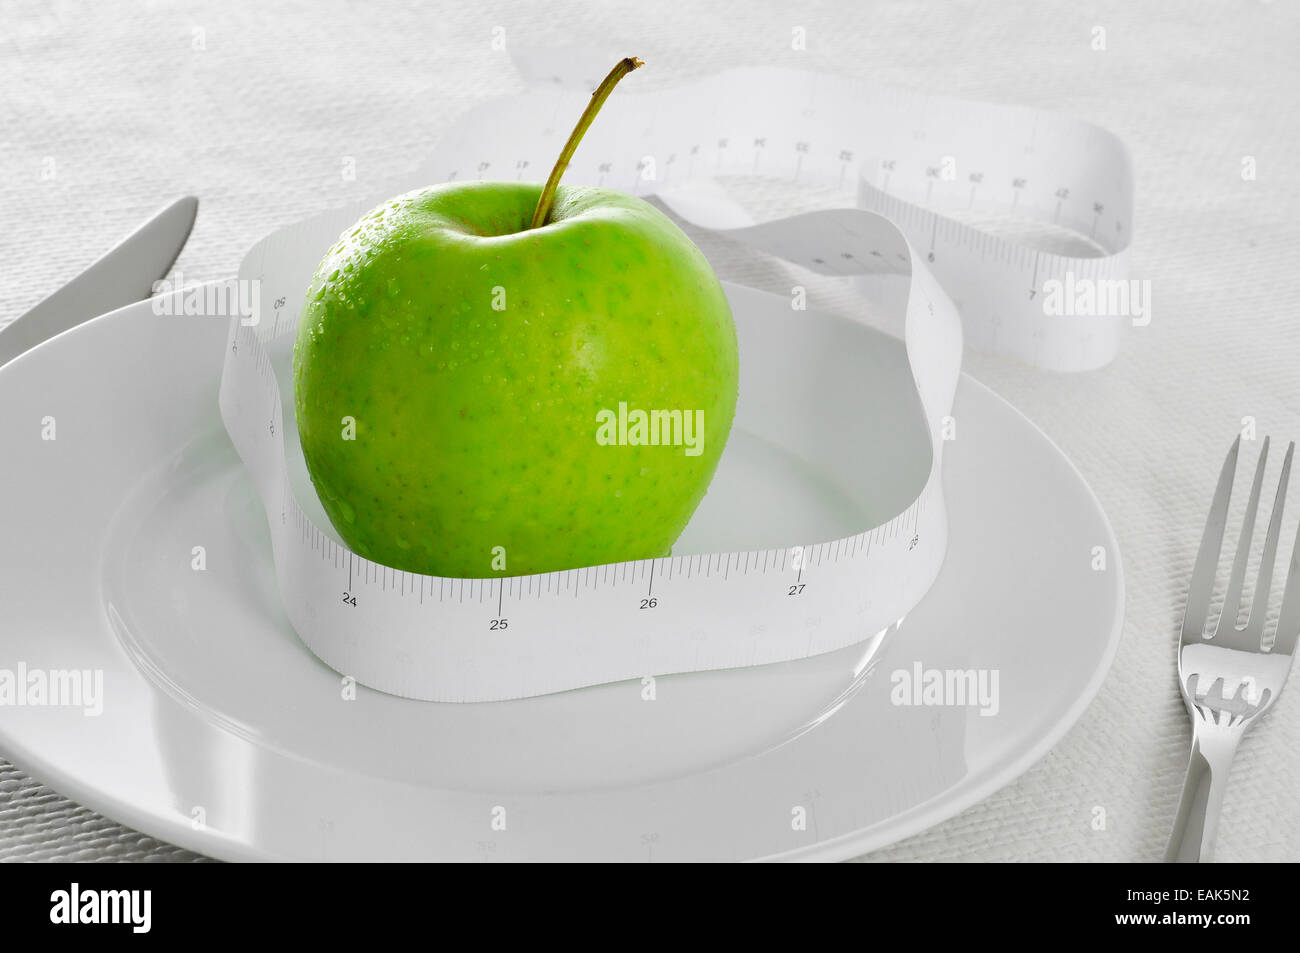 closeup of a plate with a fresh apple and a measuring tape on a set table, symbolizing the concept of dieting or to stay fit Stock Photo